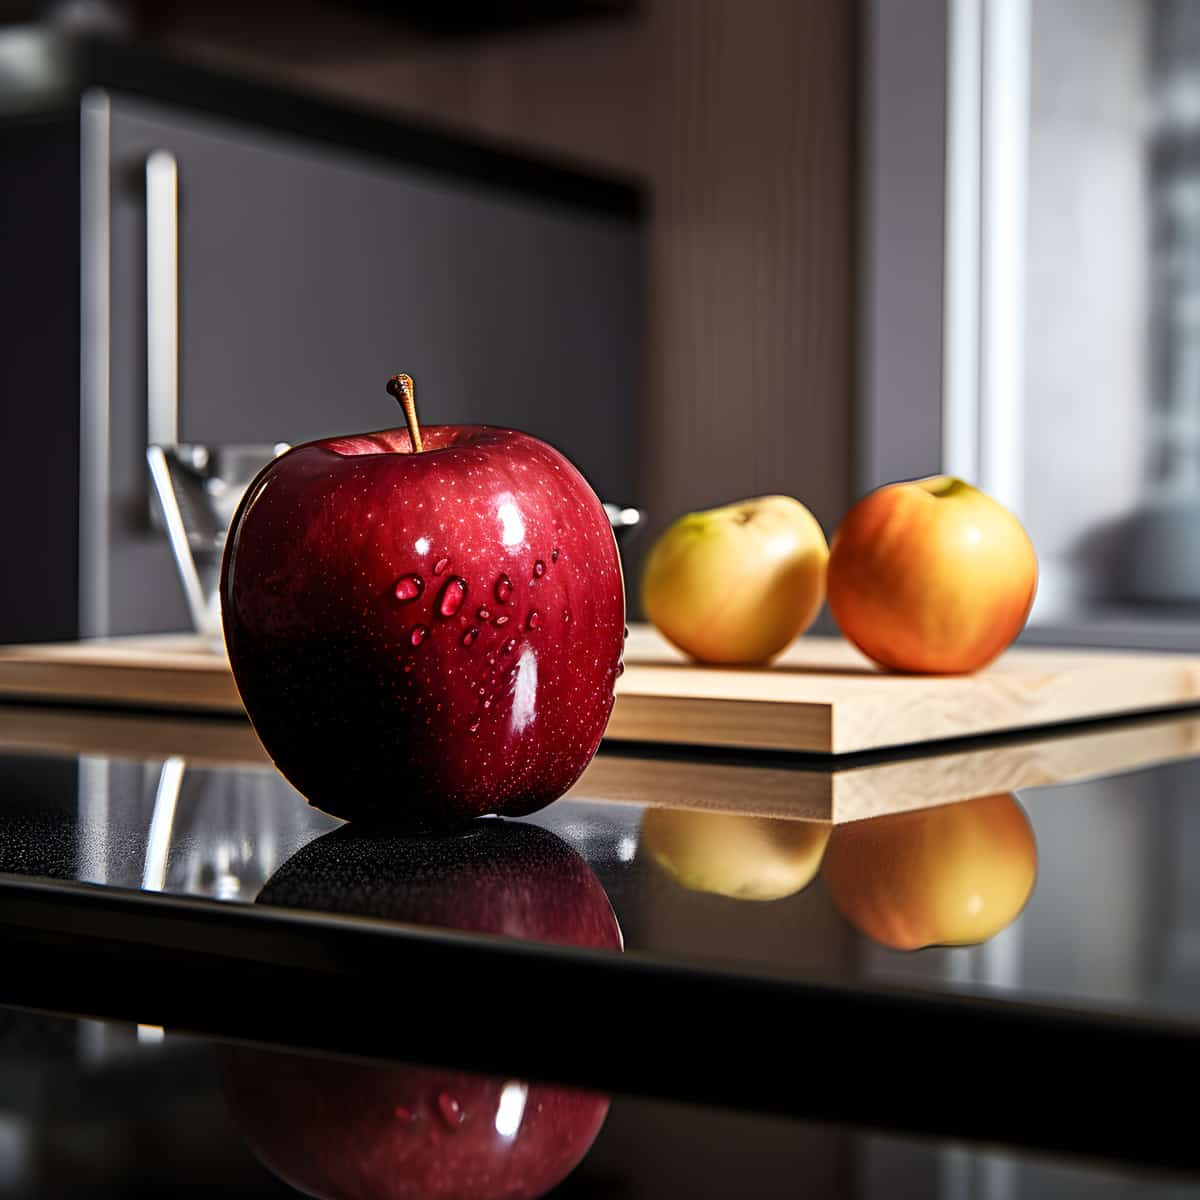 Apples on a kitchen counter